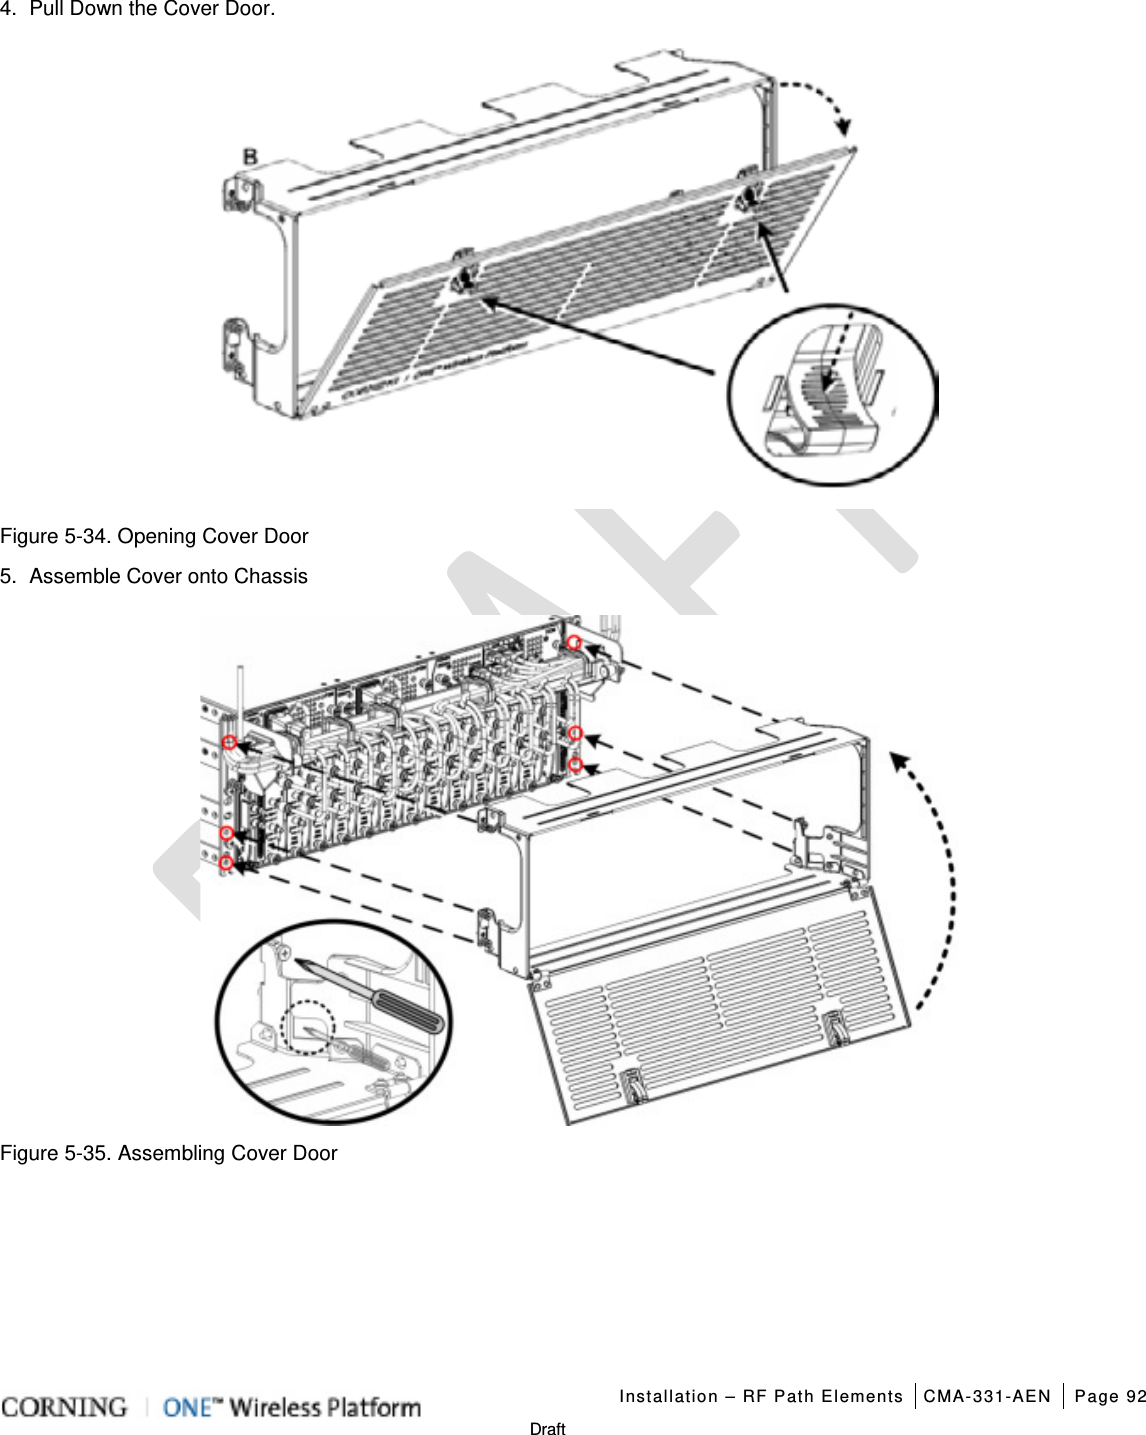   Installation – RF Path Elements CMA-331-AEN Page 92   Draft 4.  Pull Down the Cover Door.  Figure  5-34. Opening Cover Door 5.  Assemble Cover onto Chassis  Figure  5-35. Assembling Cover Door    